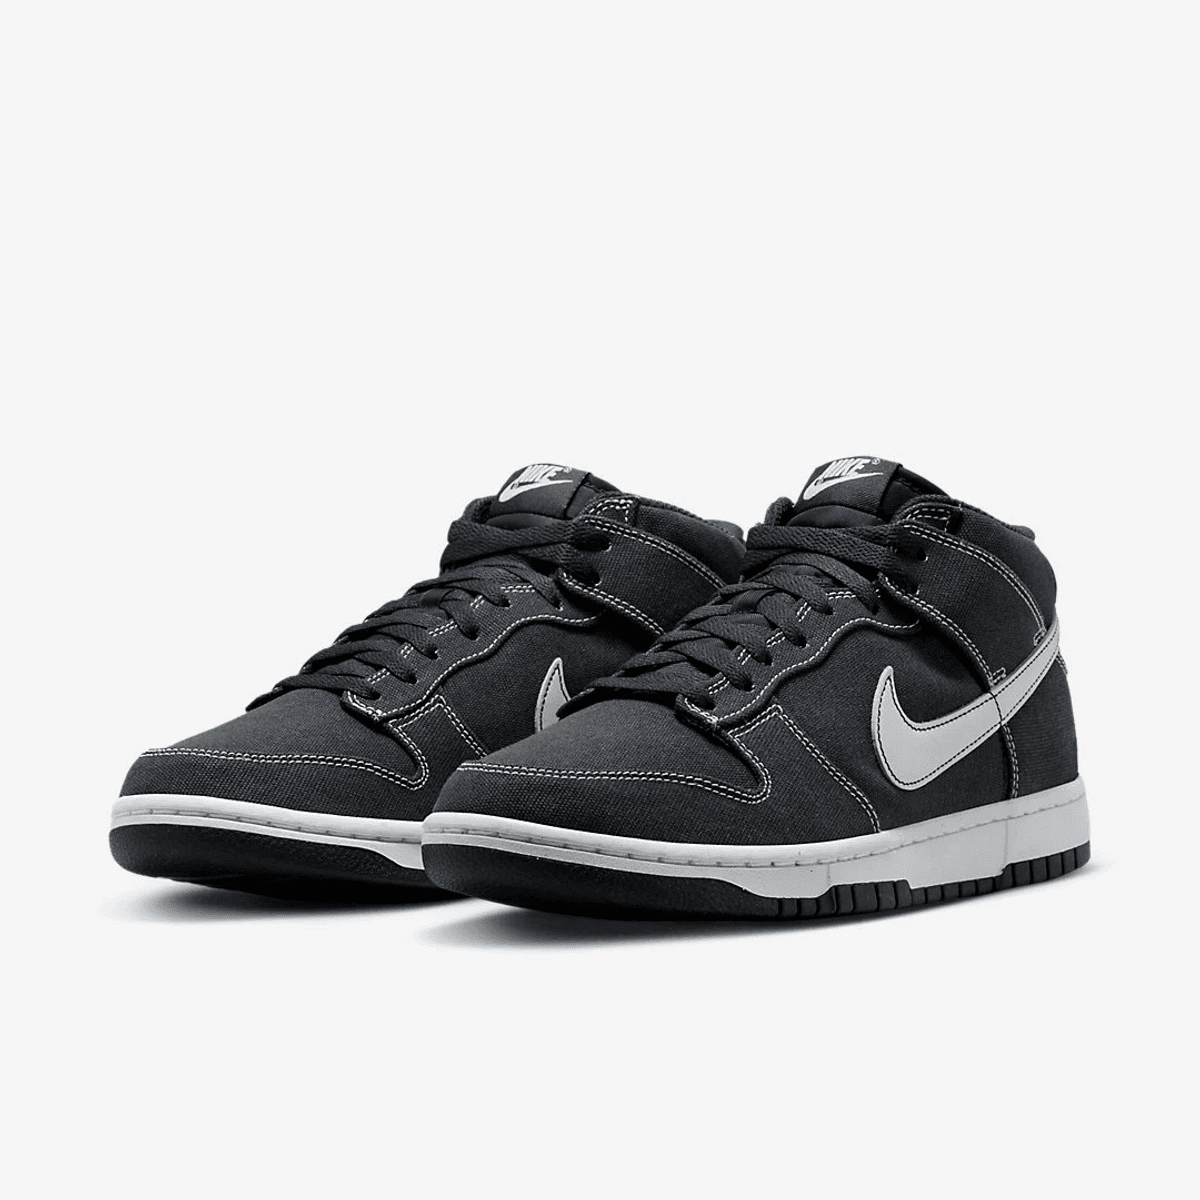 Blast From The Past With Nike Dunk Mid Off-Noir